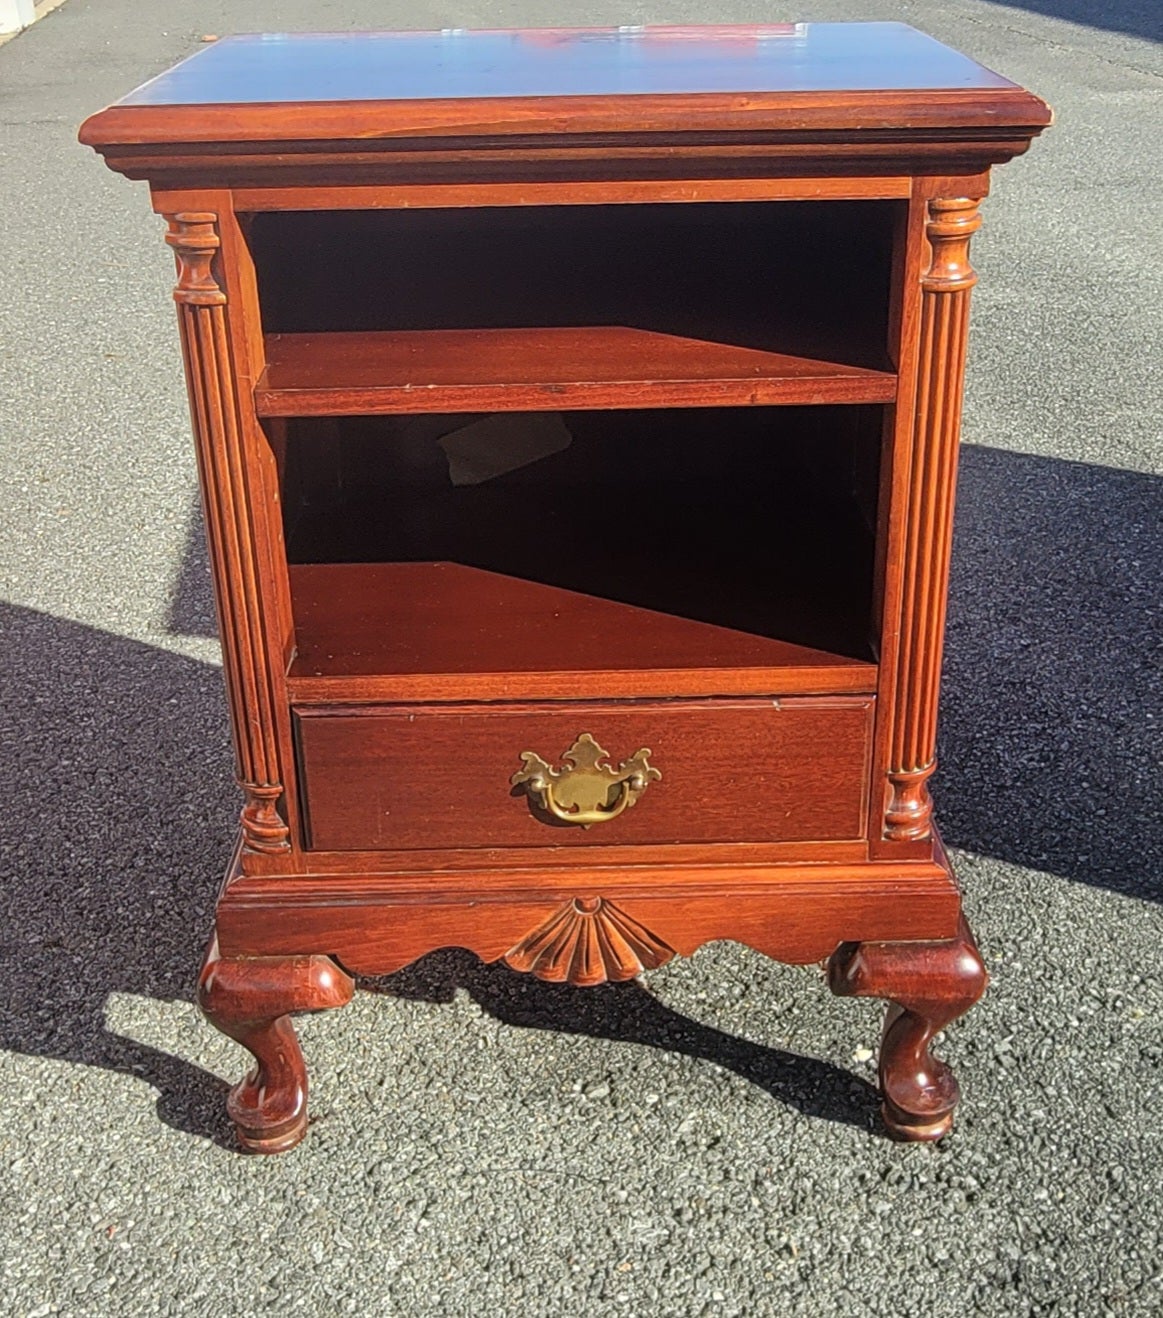 A beautiful patinated Early 1900's Chippendale genuine Mahogany tiered drawer bedside table in good condition. Beautiful mahogany grain. Dovetail drawers construction with patinated original drawer pulls. Perfectly functioning drawer and a wiring